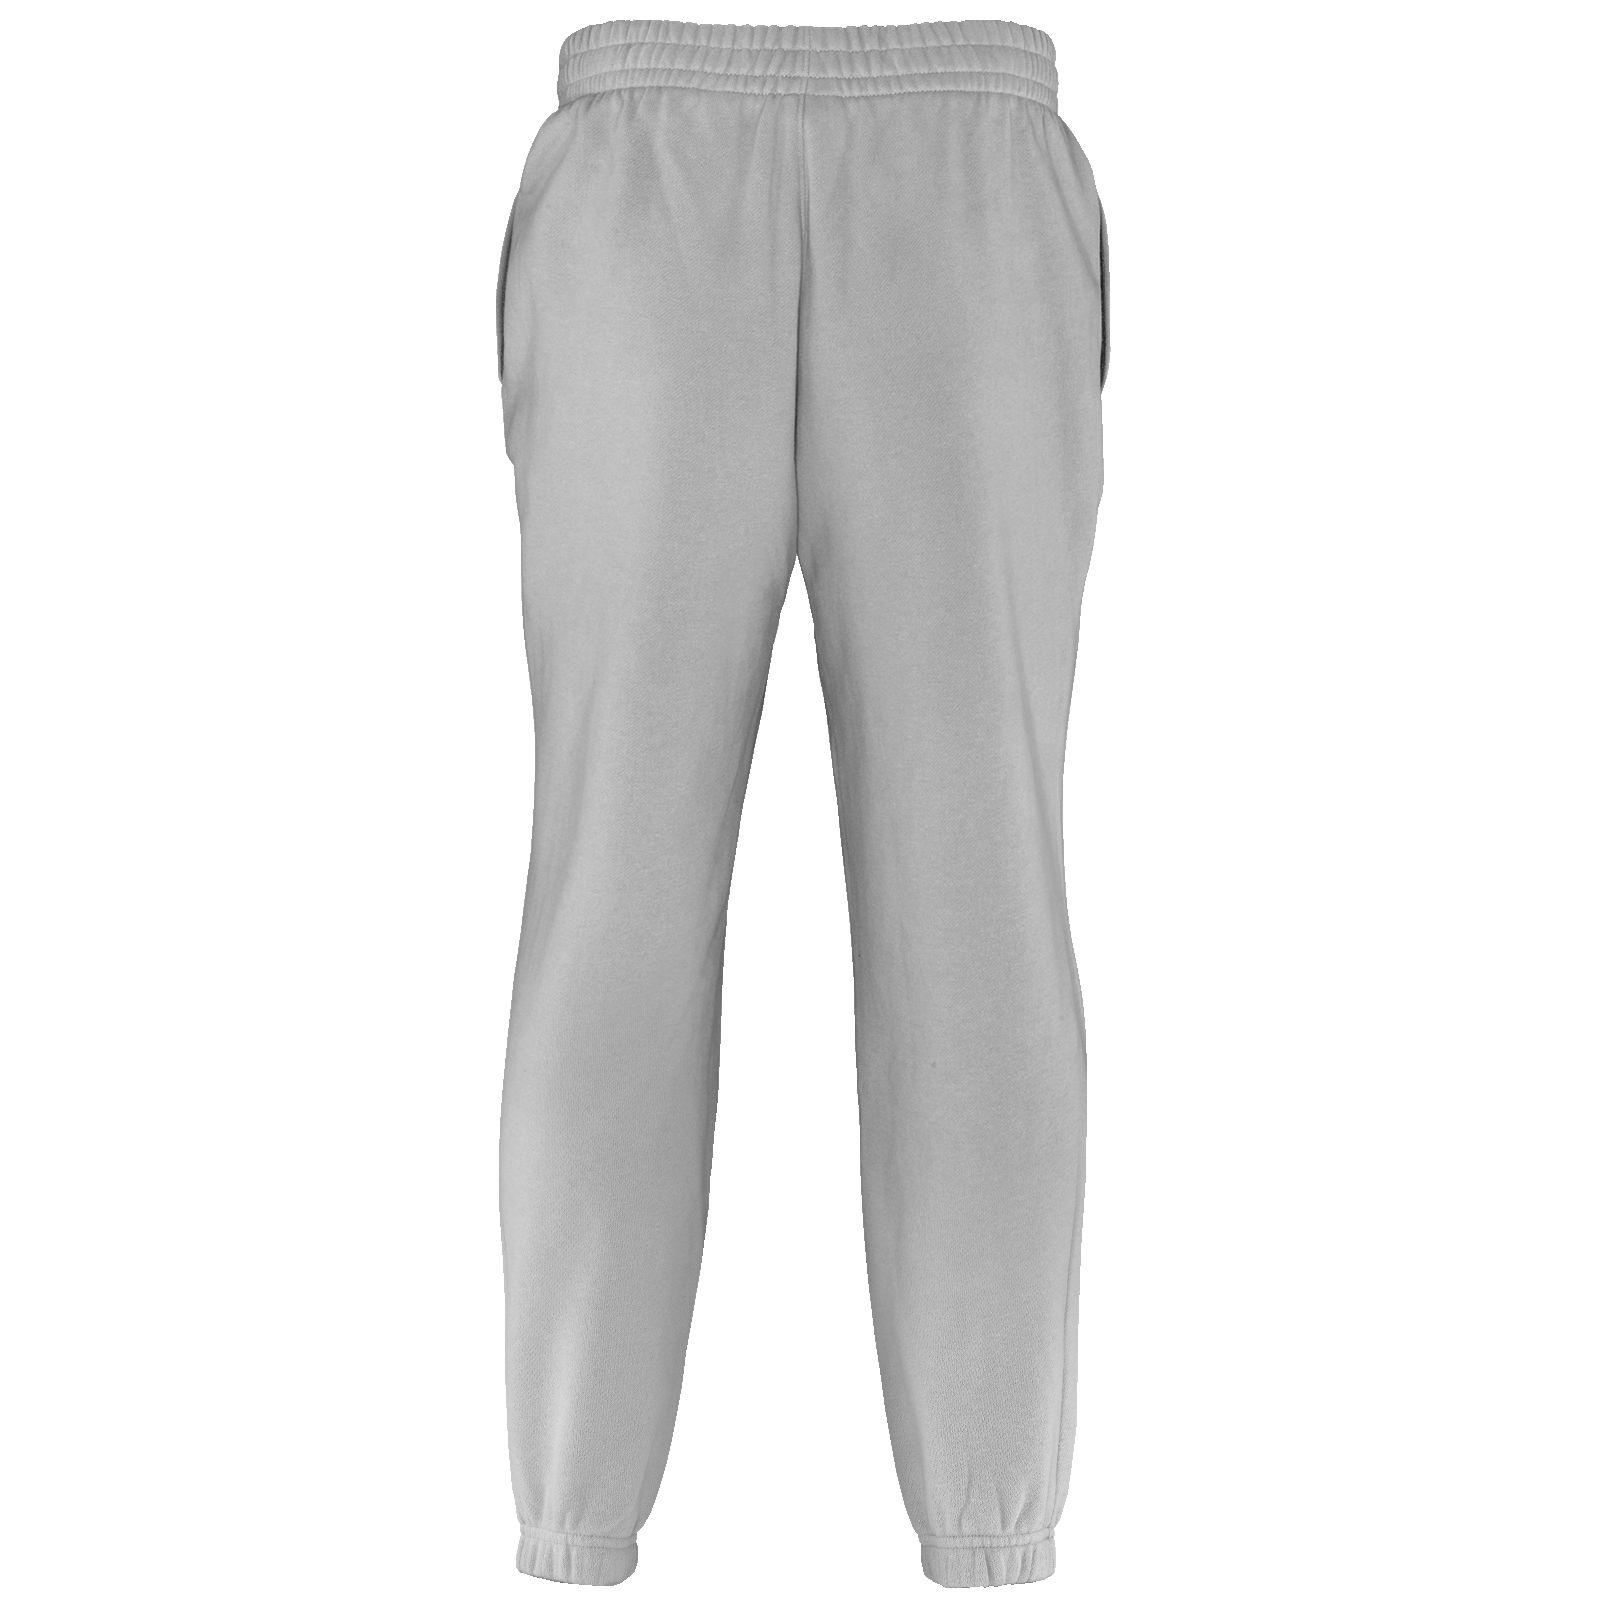 Youth Custom Perf Sweatpants, Alloy image number 5